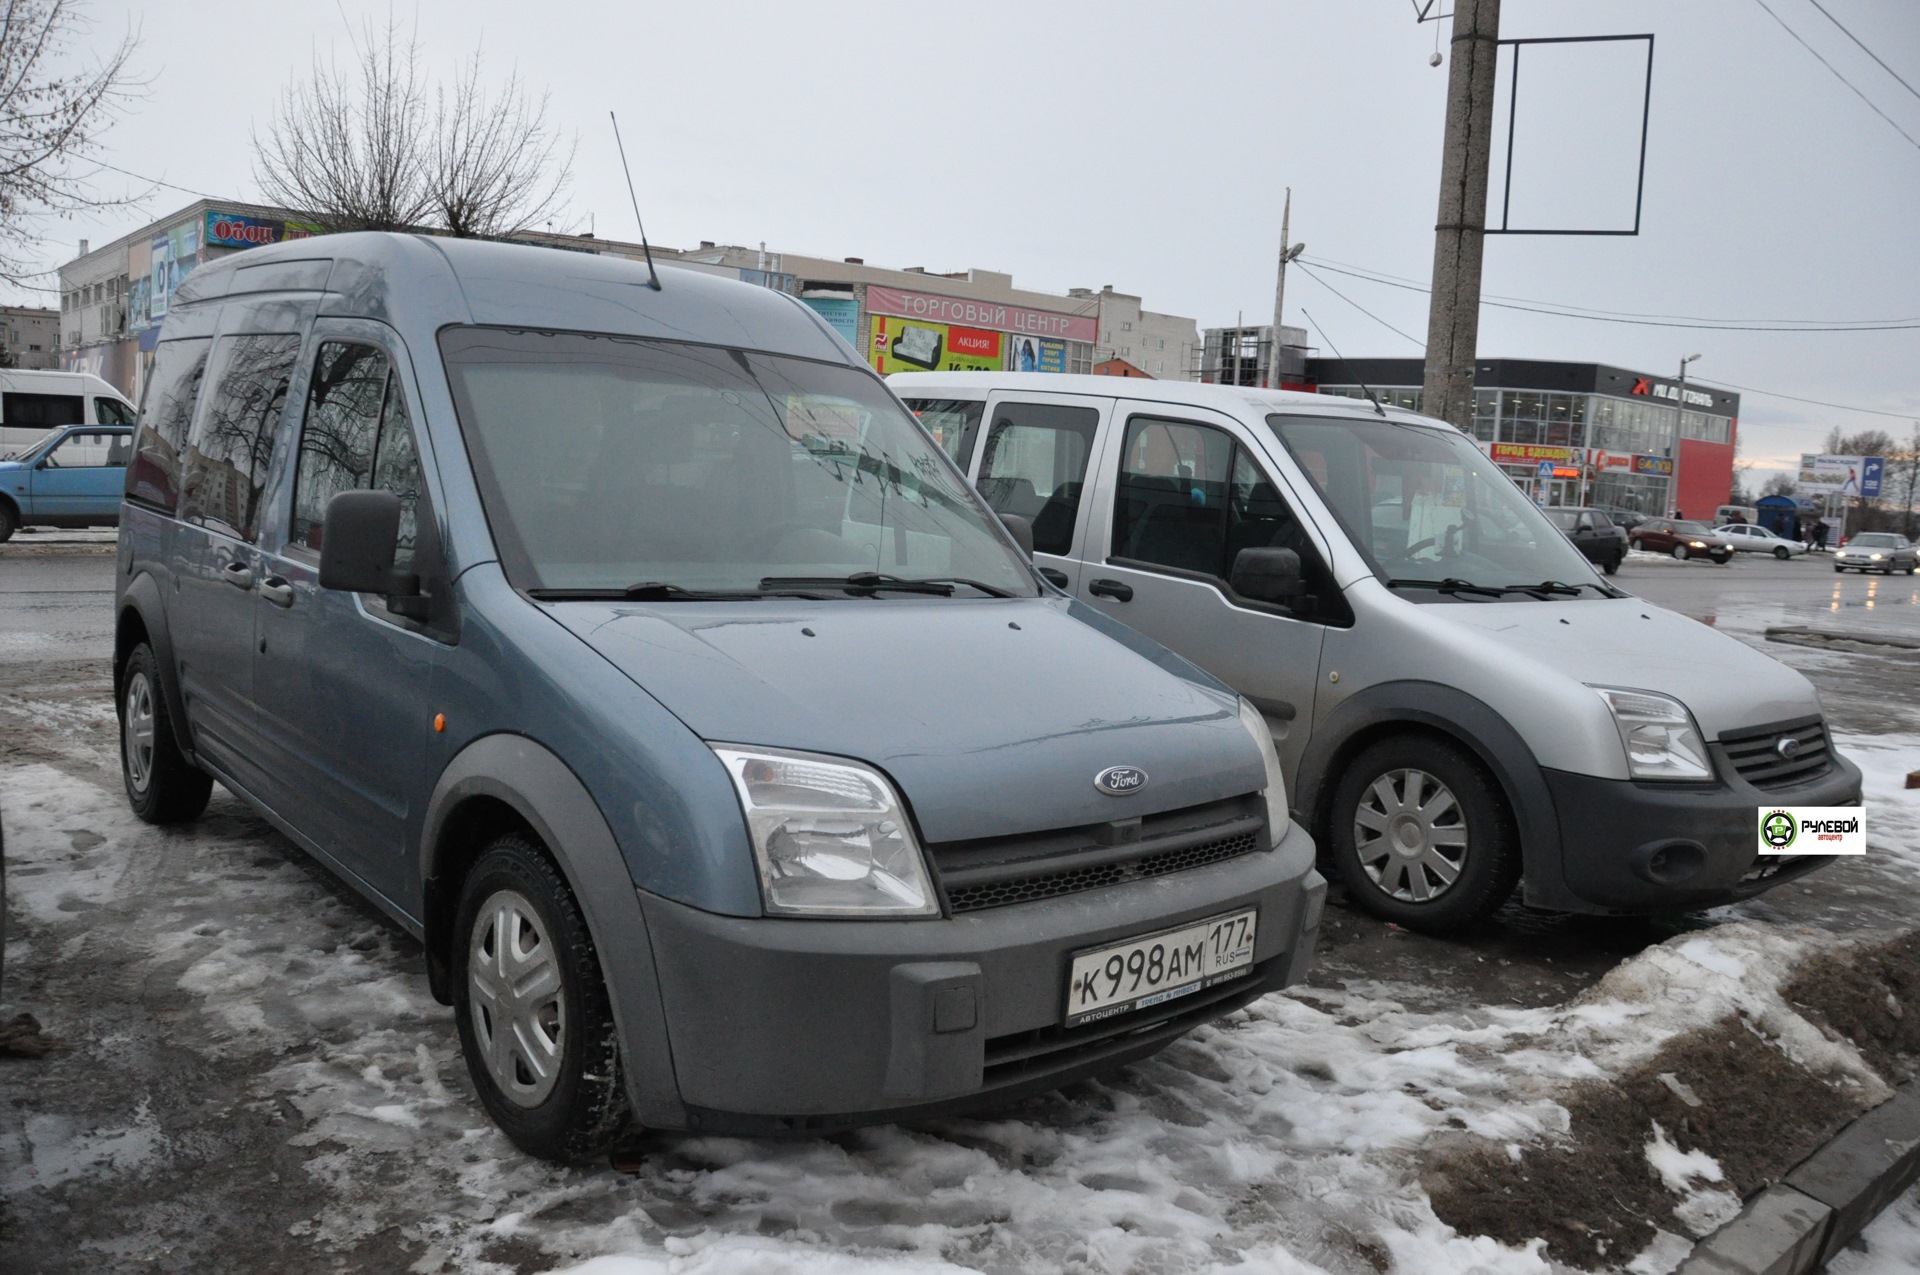 Форд торнео коннект бу. Ford Transit connect 2002. Ford Tourneo connect 2005. Ford Transit 2005 connect. Ford Transit Tourneo connect 2002-.